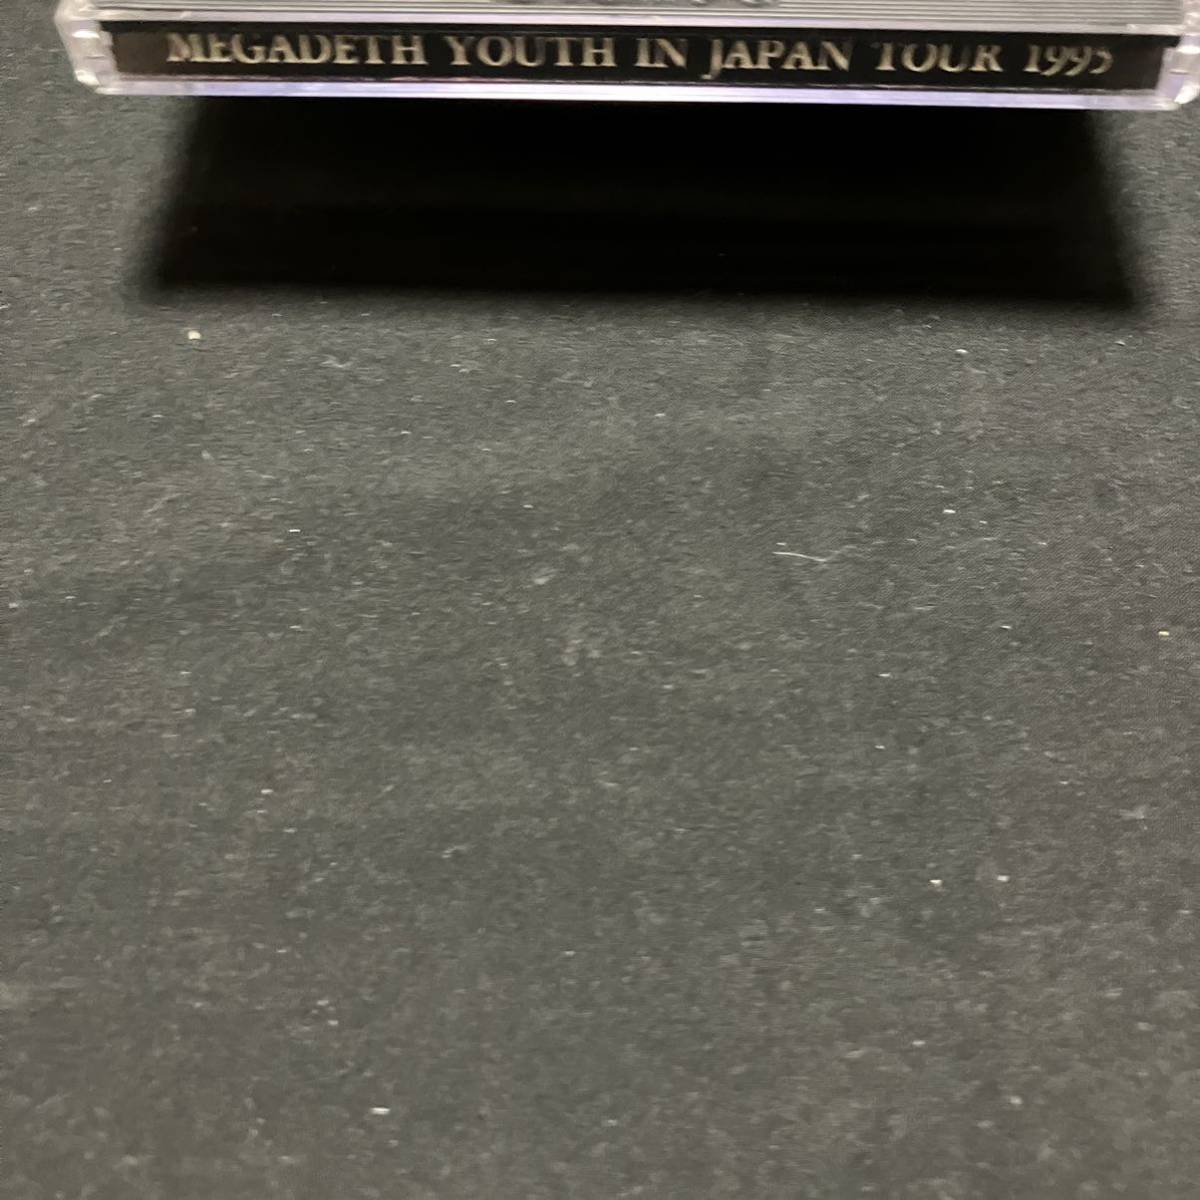 ZG1 Megadeth youth in Japan tour 1995 rare 